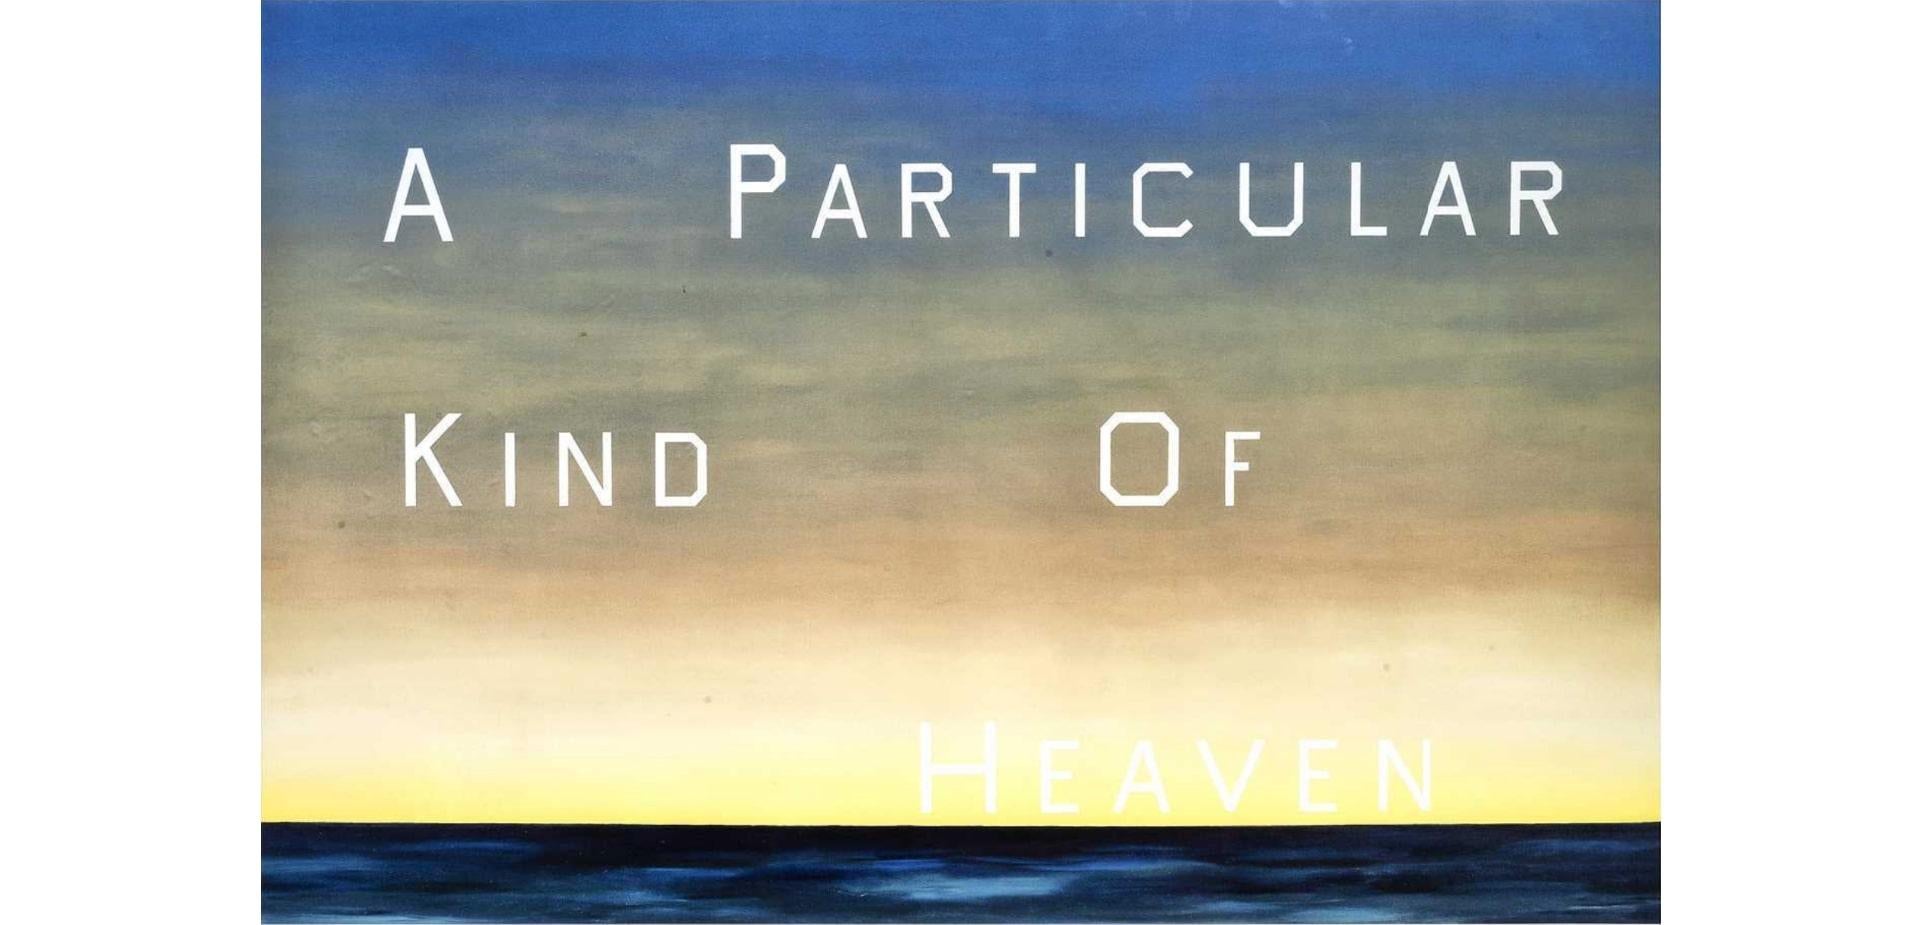 A Particular Kind Of Heaven 

by Ed Ruscha

1983

Offset lithograph on paper

size - 24 × 36 1/5 in 61 × 92 cm

Open edition

Mint condition

Gallery / description text in margin along the bottom 

Ed Ruscha is an American artist celebrated for his